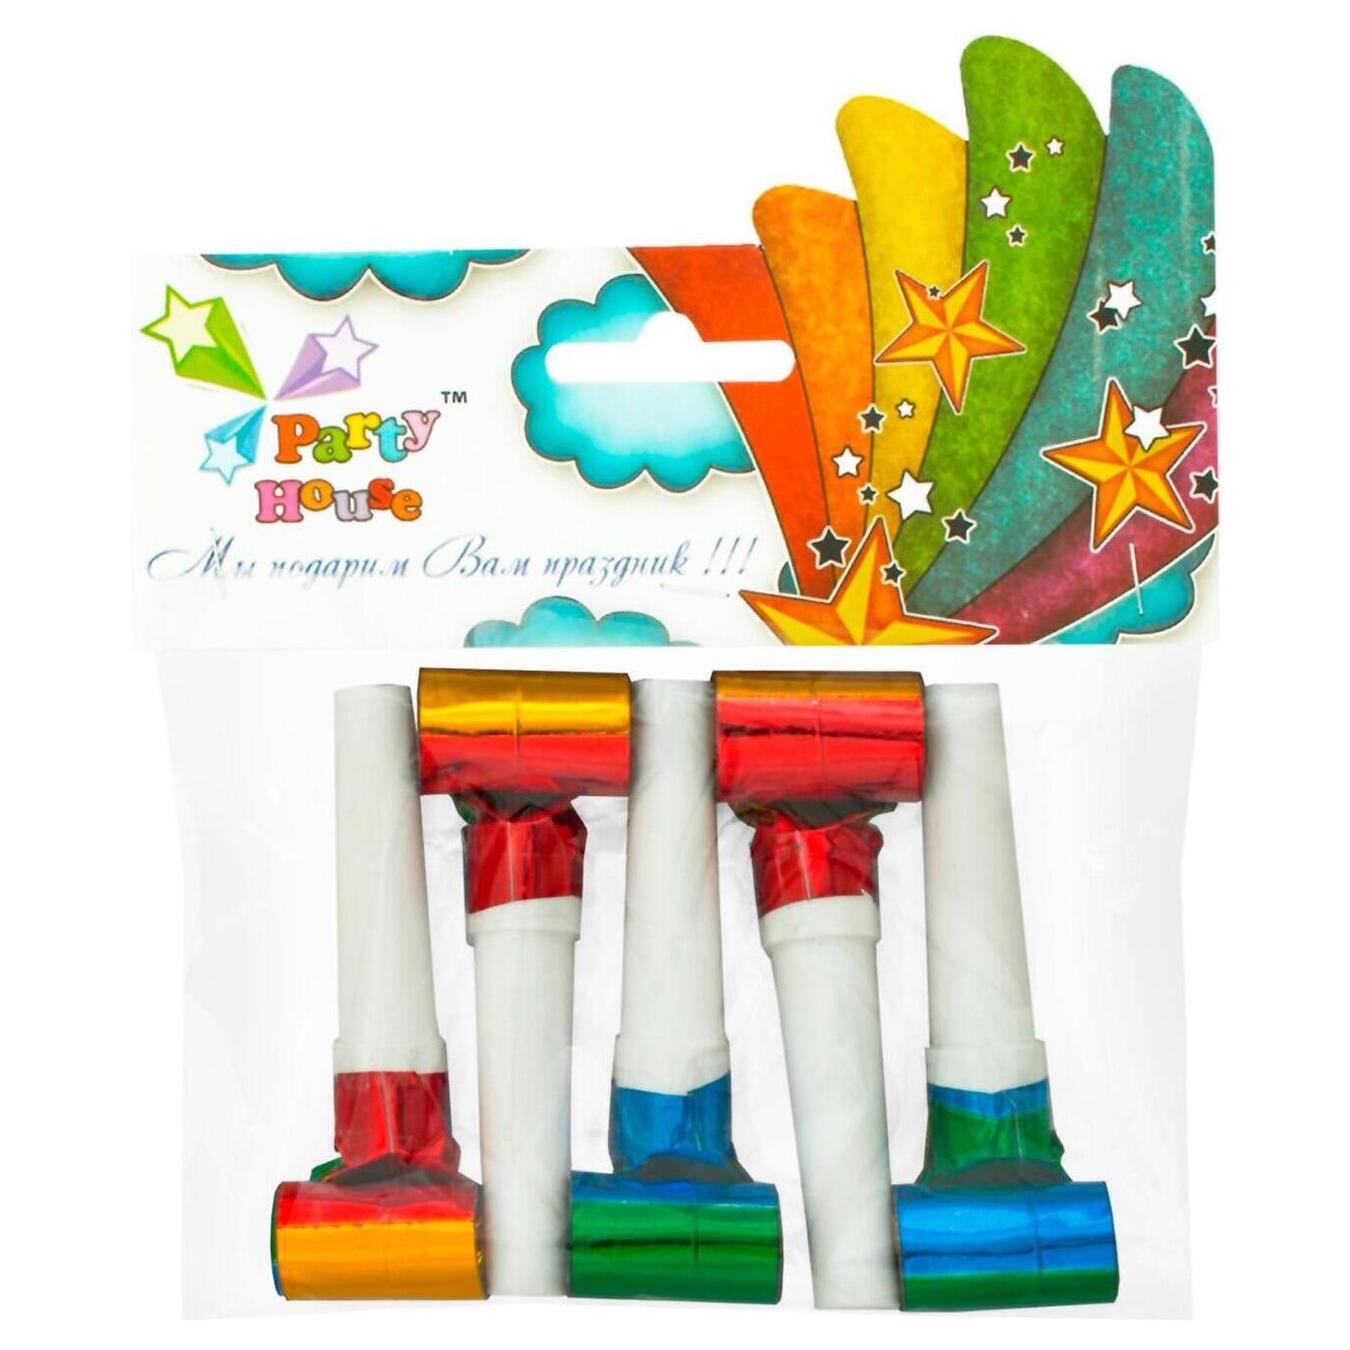 Assorted party house horn tongue 5pcs